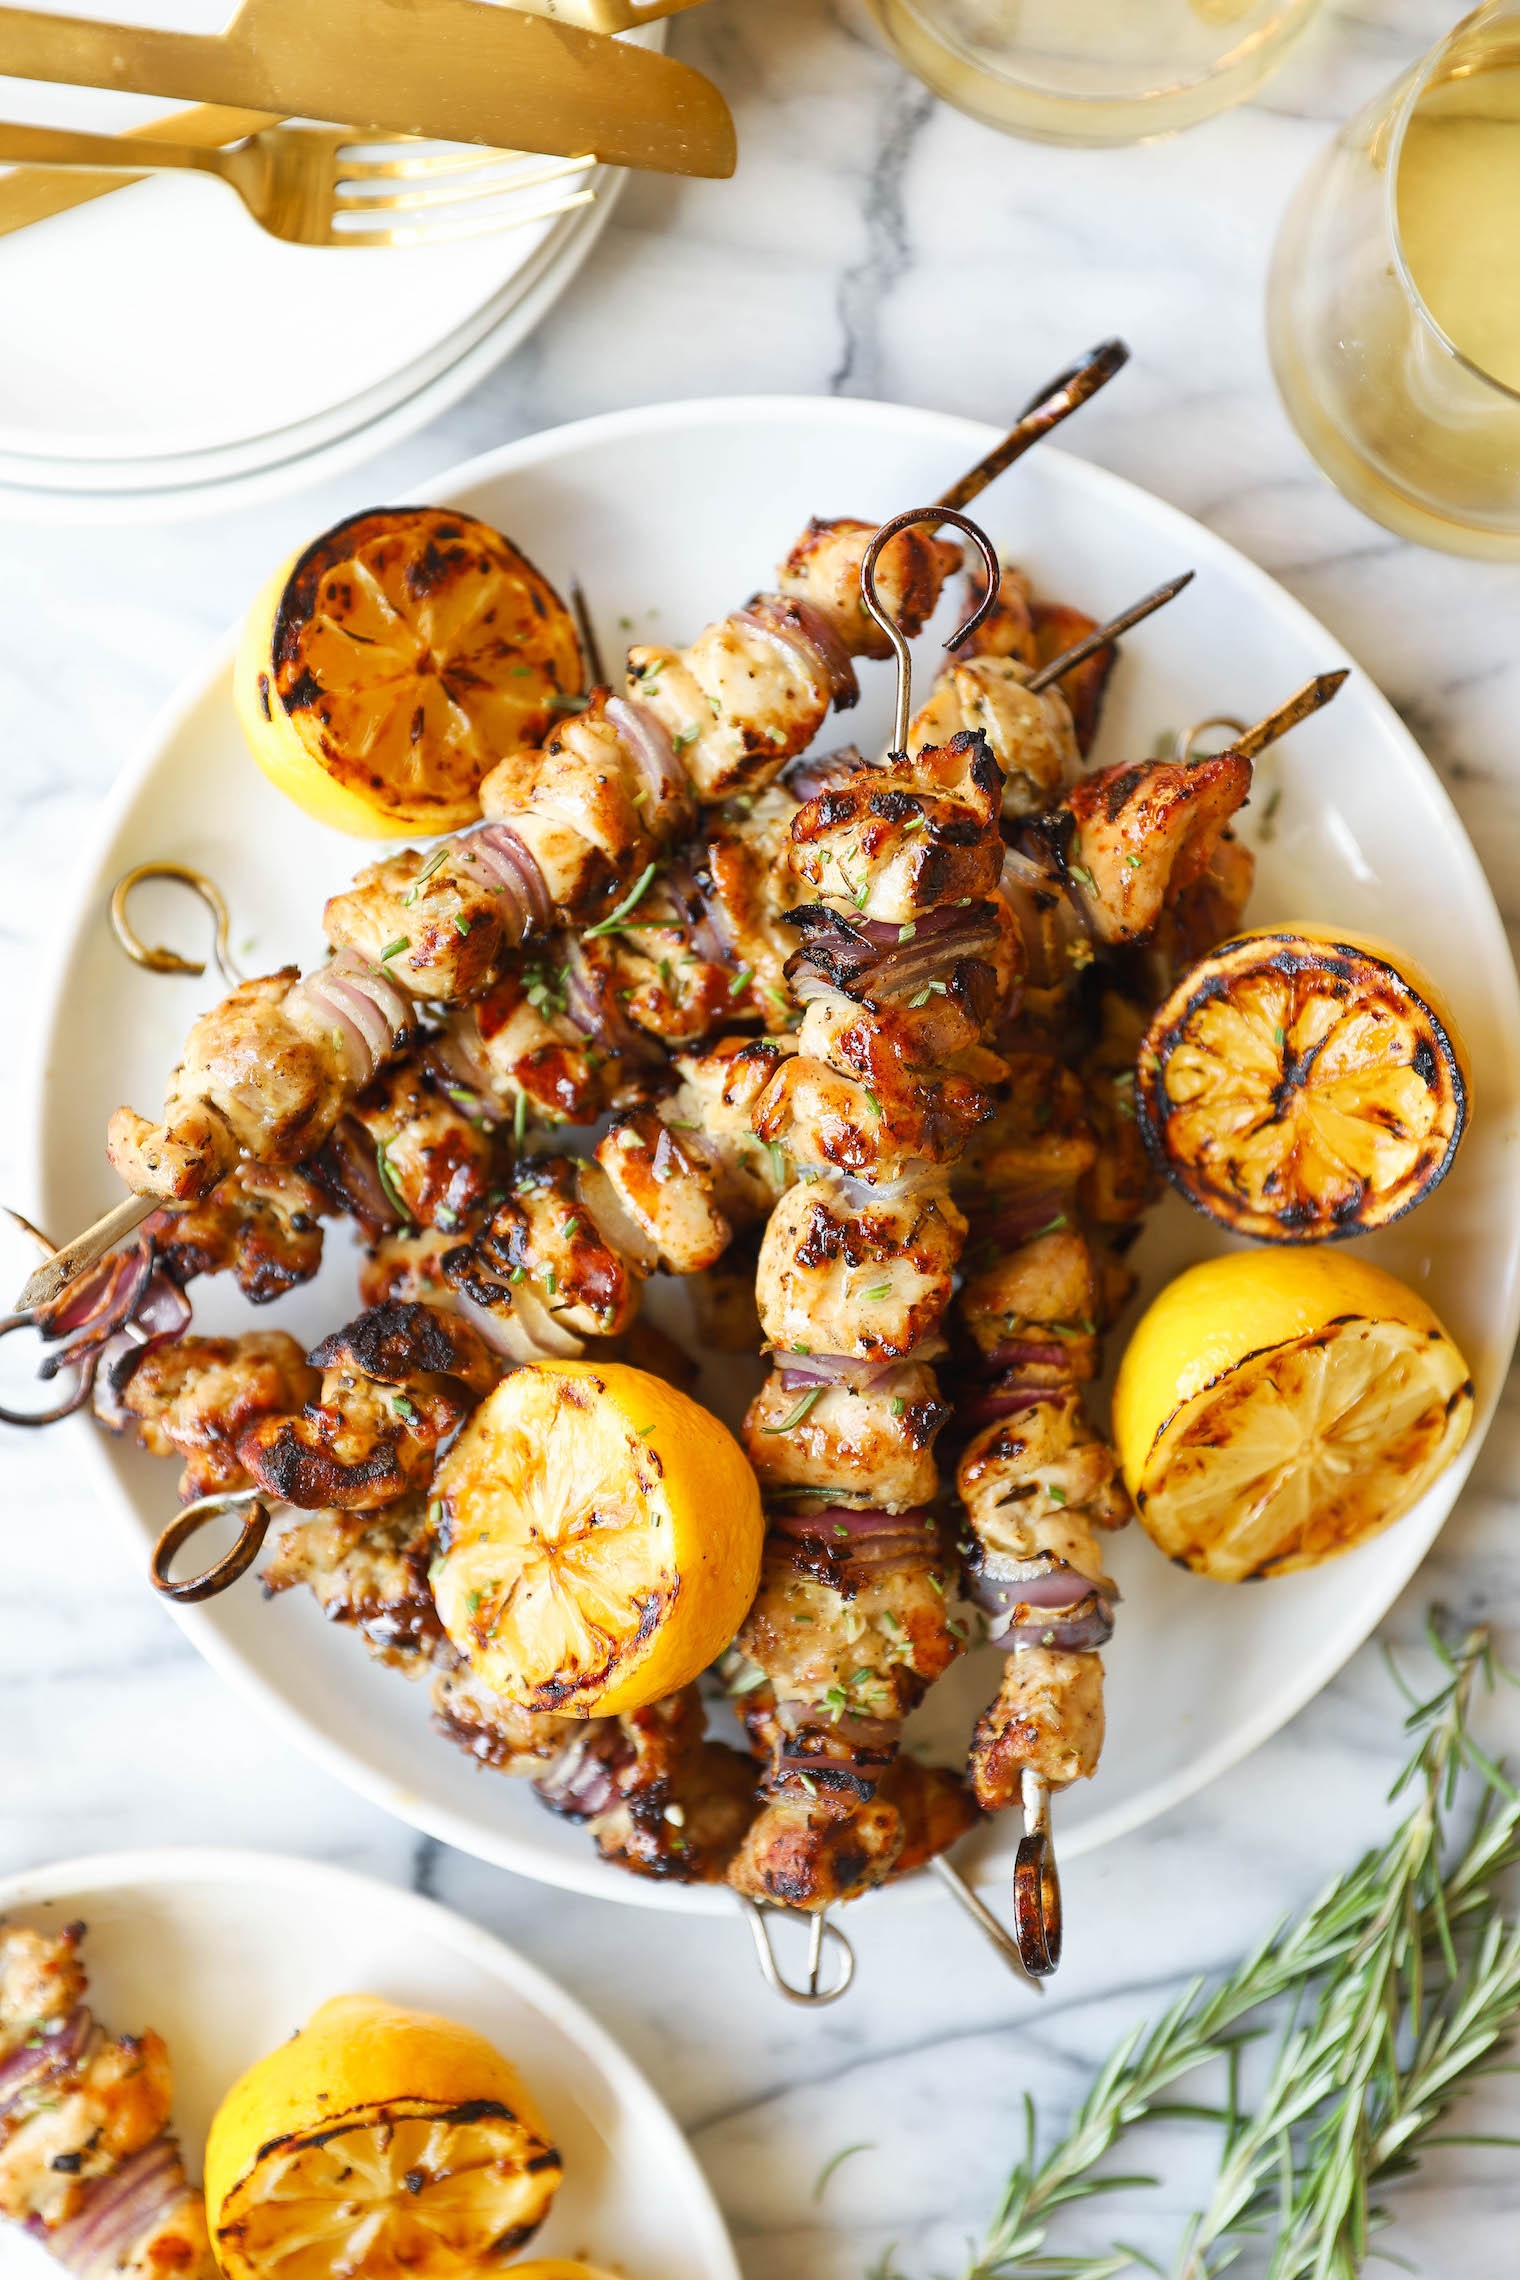 18 Kebab Recipes for the Grill